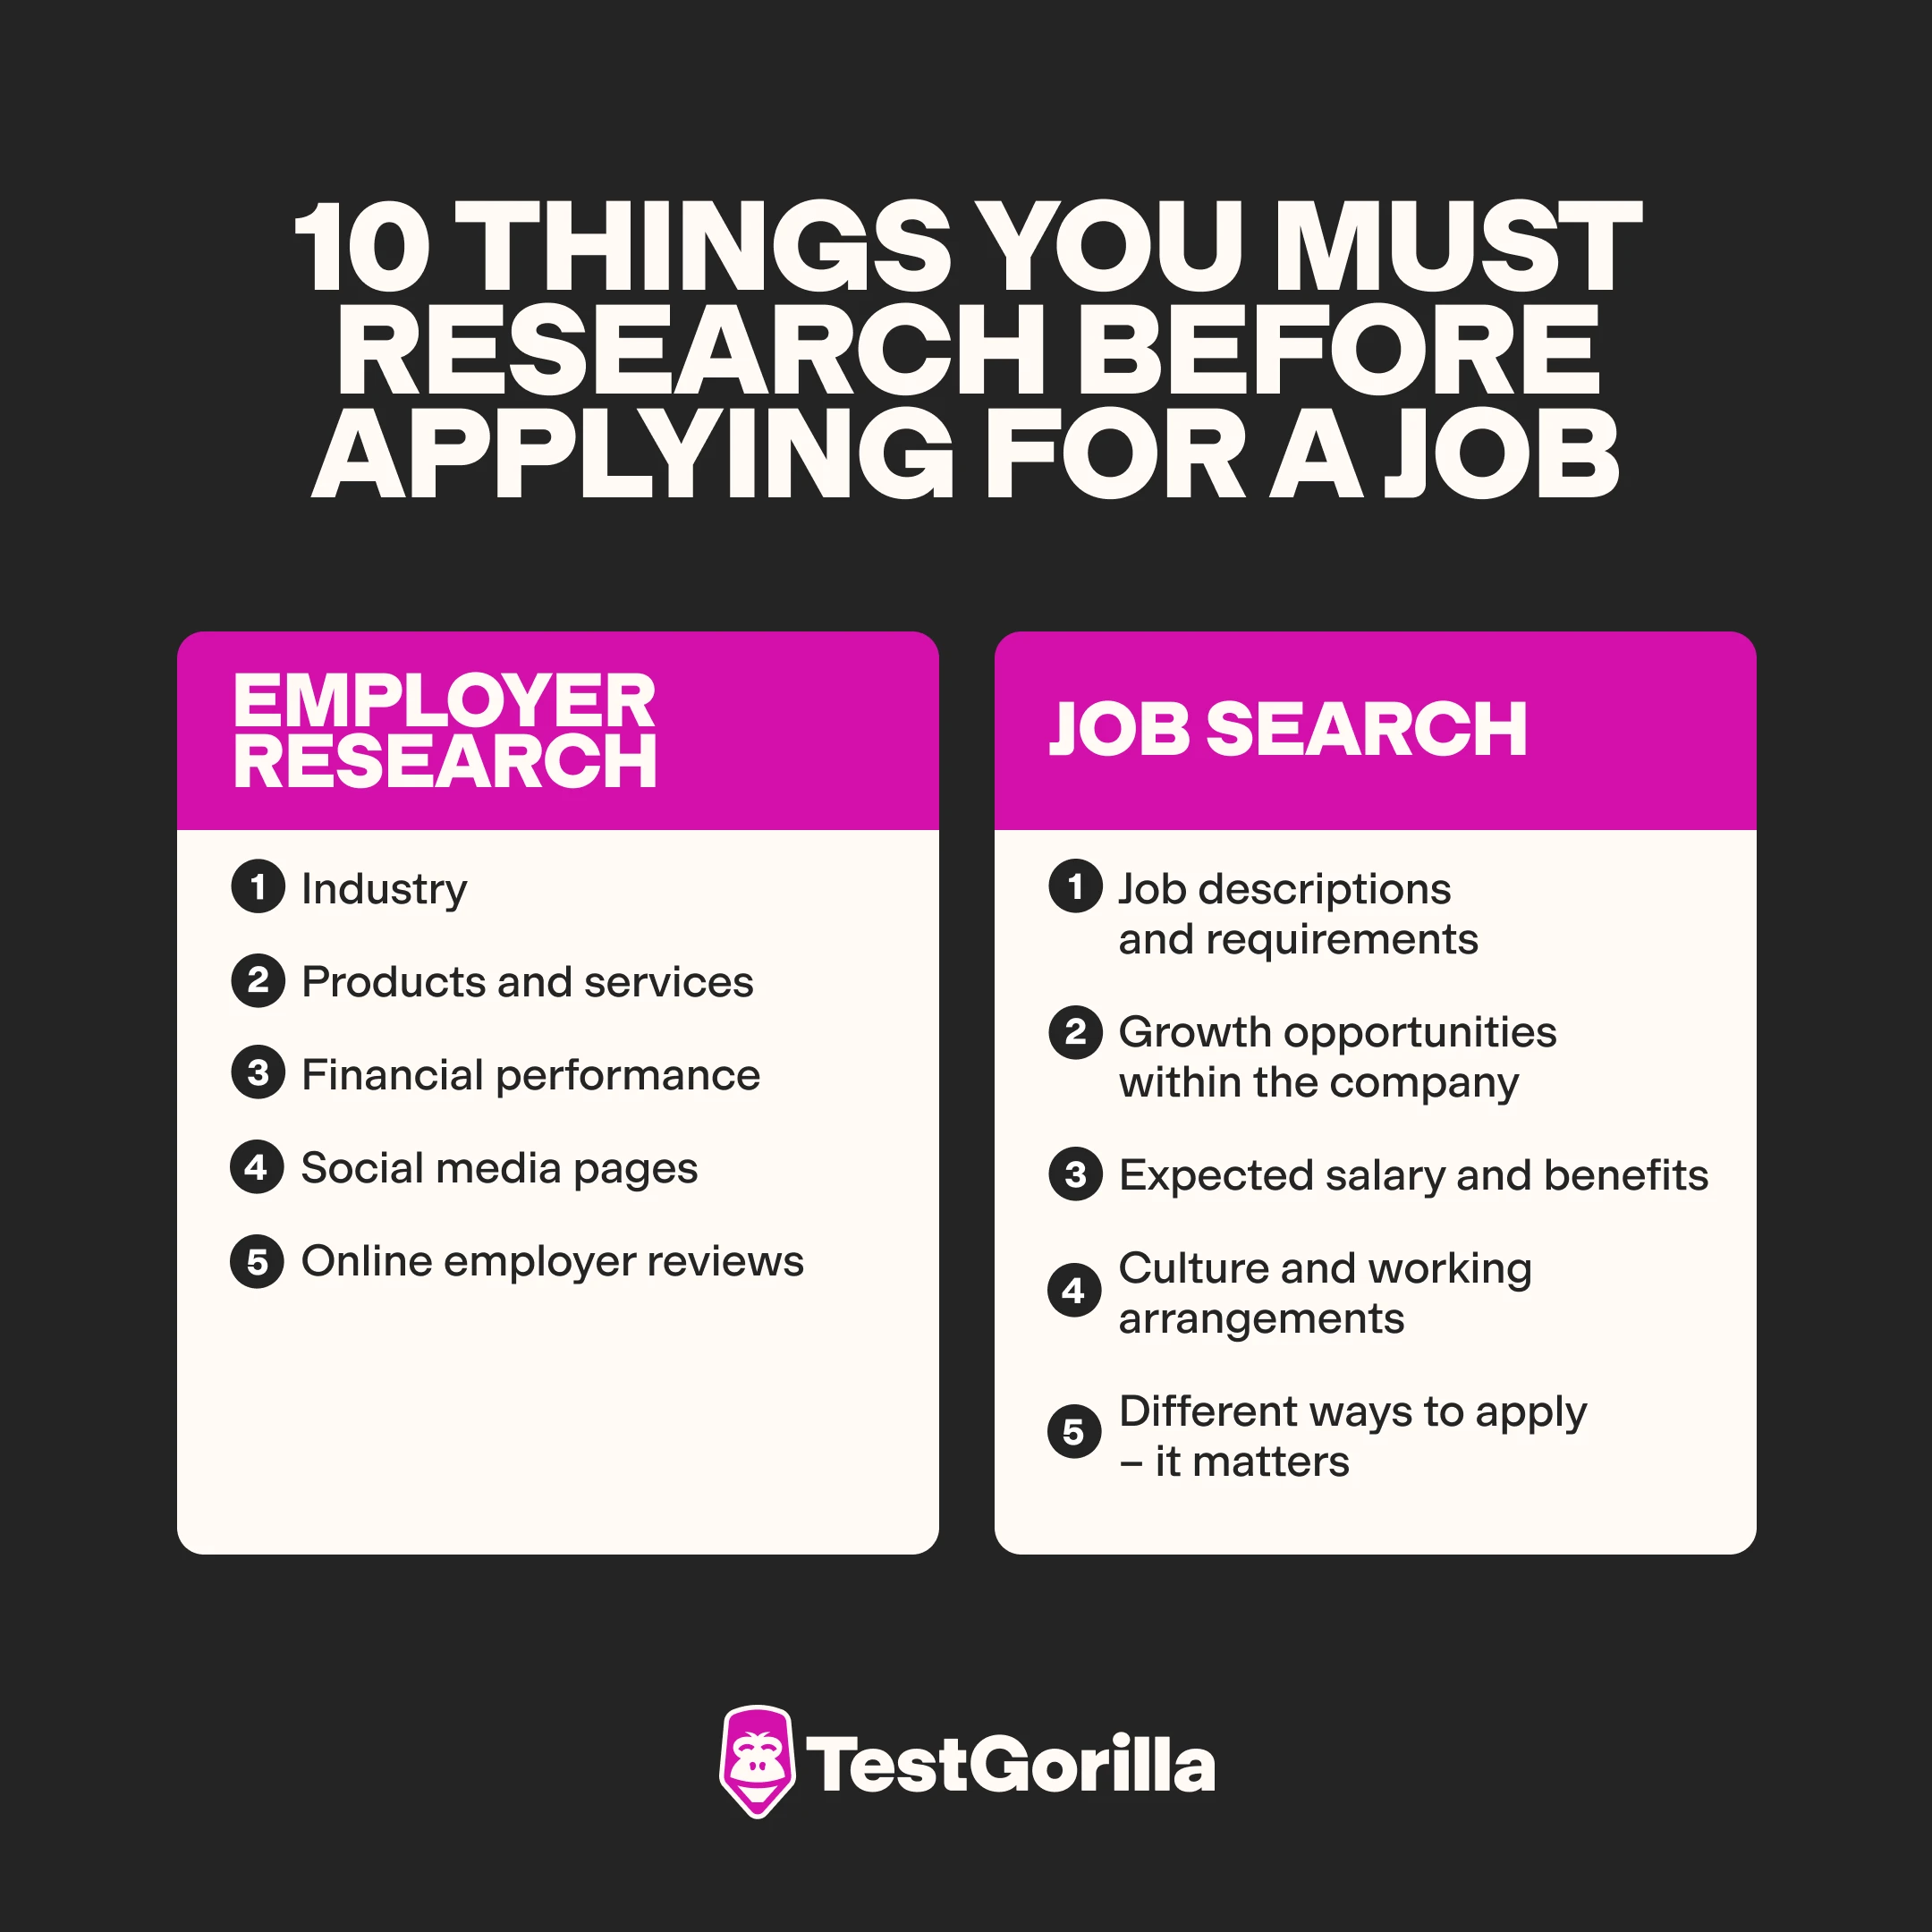 10 things you must research before applying for a job graphic